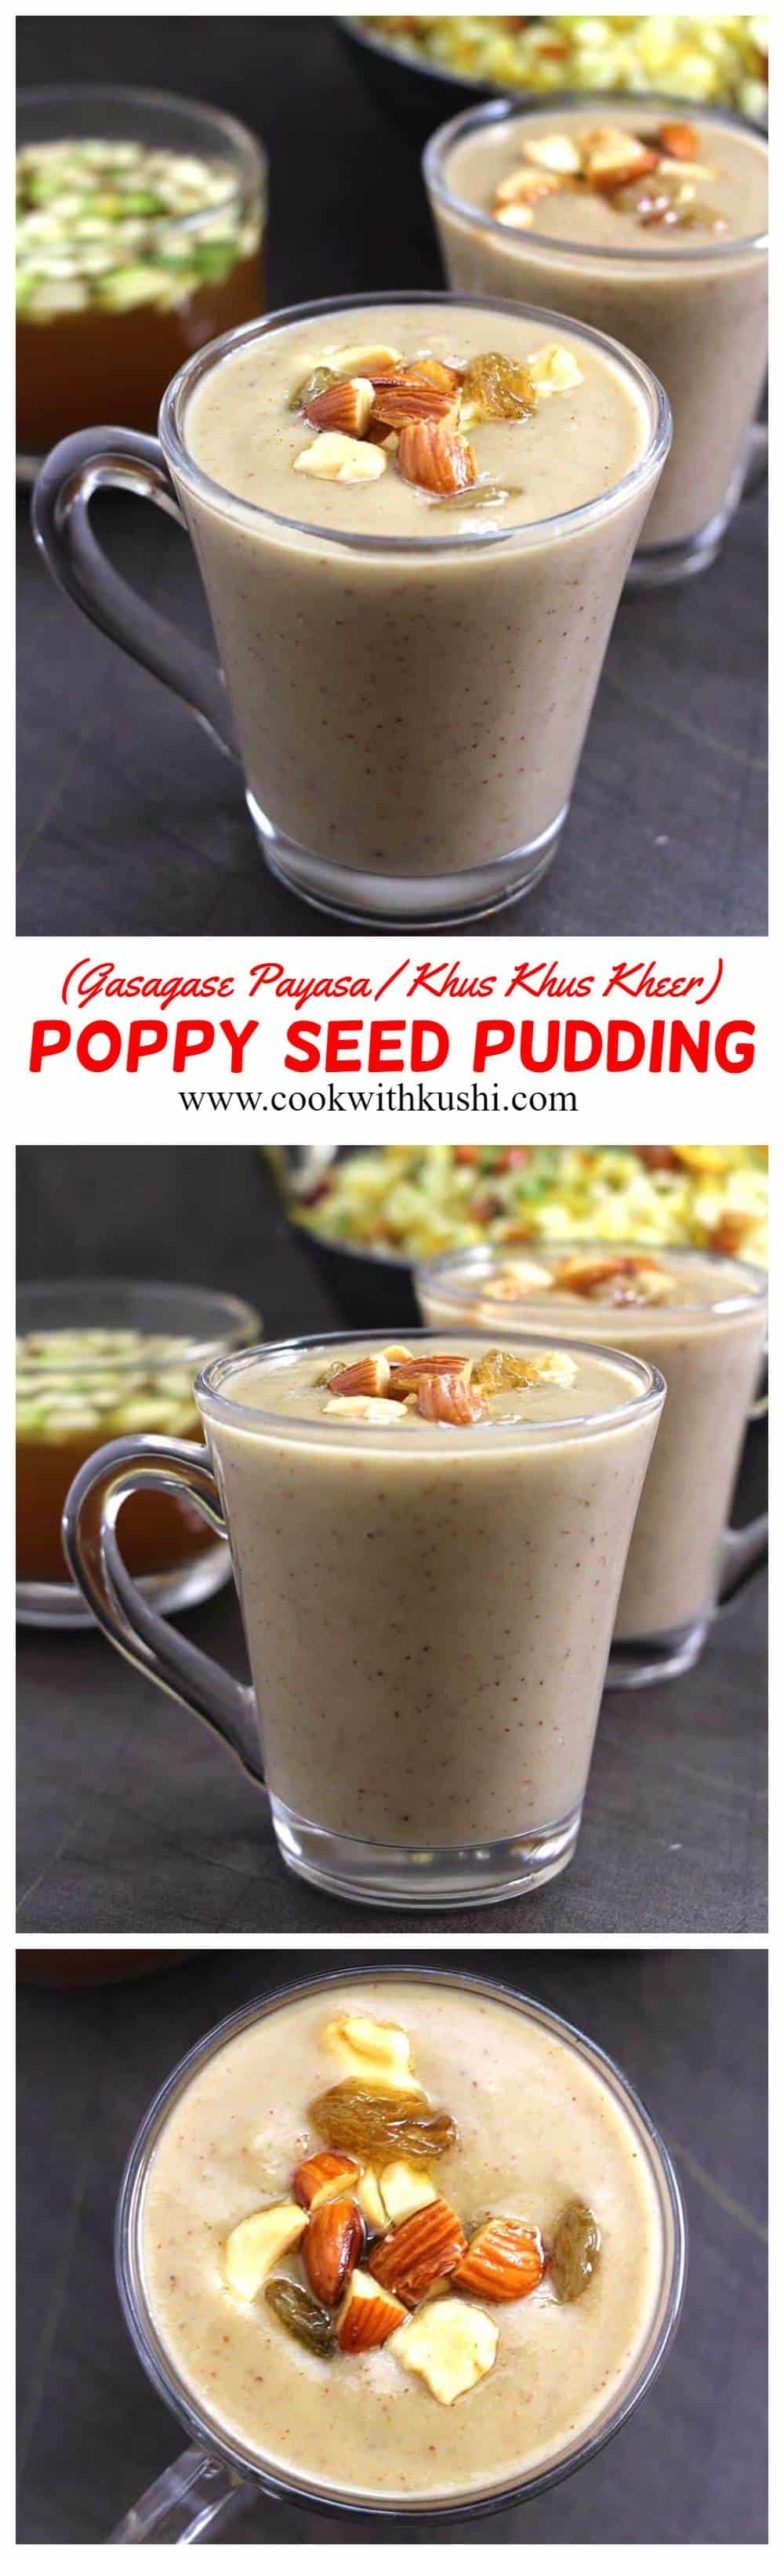 Gasagase Payasa or Poppy Seeds Pudding is a rich, creamy and flavorful traditional dessert or sweet from state of Karnataka, India prepared using coconut, jaggery (or sugar), poppy seeds. #gasagase #poppyseeds #pudding #jaggery #coconut #coconutmilk #Indiansweets #mithai #Meetha #healthydrink #summerfood #coolantdrink #summerrecipes #vegan #glutenfree #khuskhus #kheer #instantpot